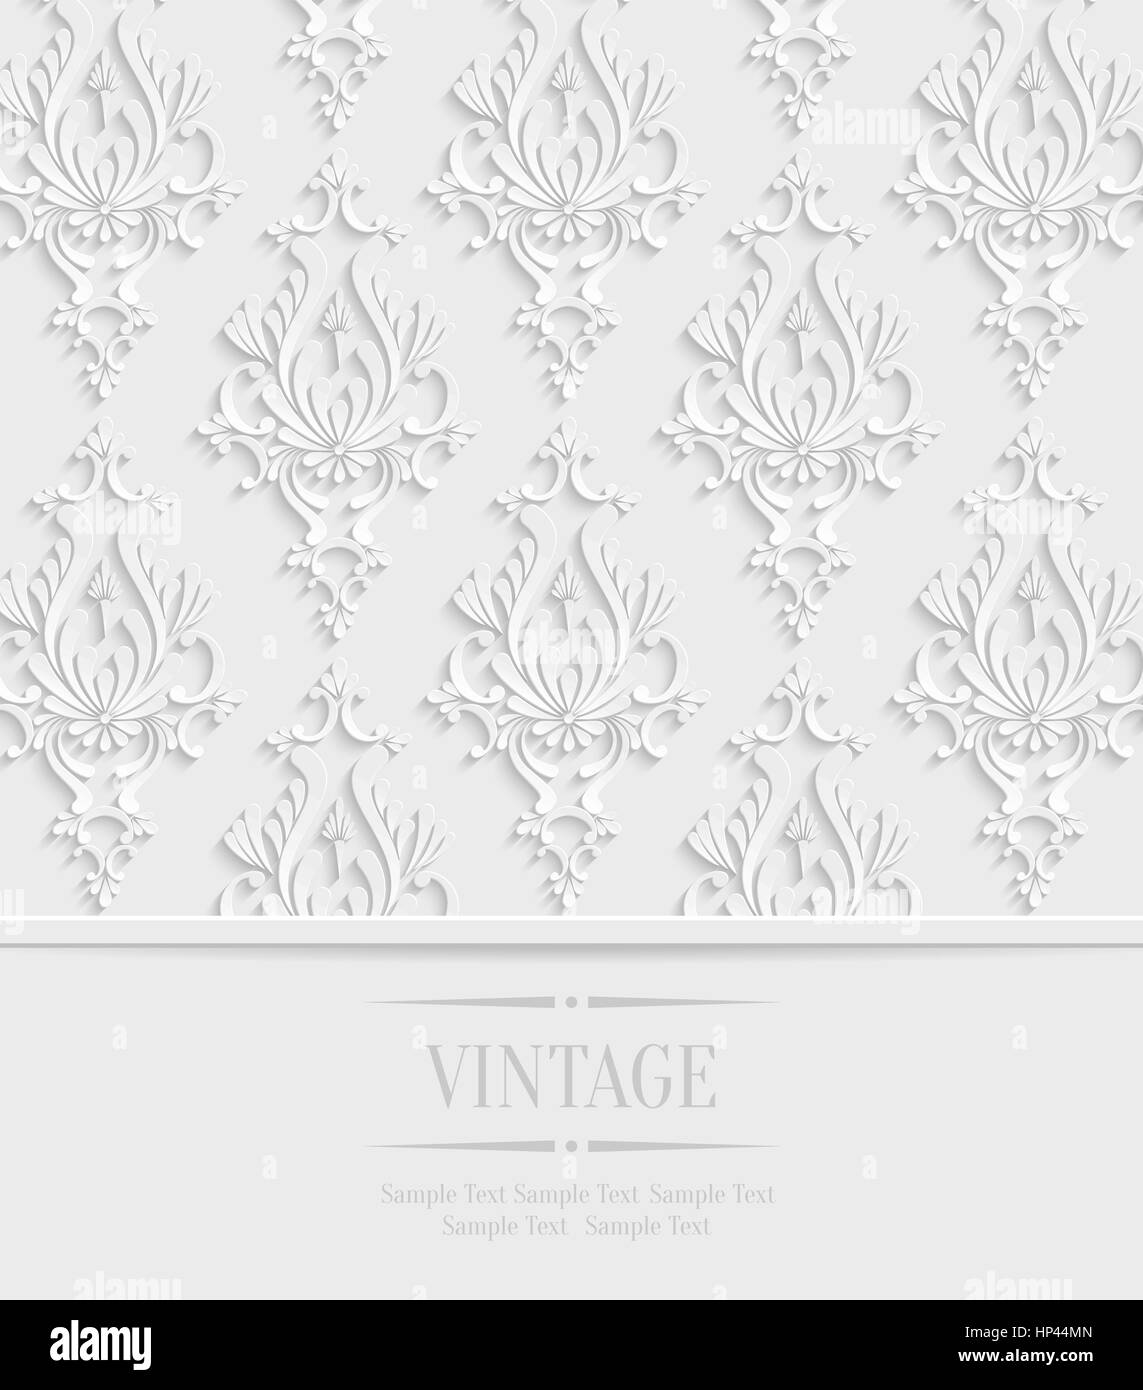 Vector 3d Vintage Wedding or Invitation Card with Floral Damask Pattern Stock Vector